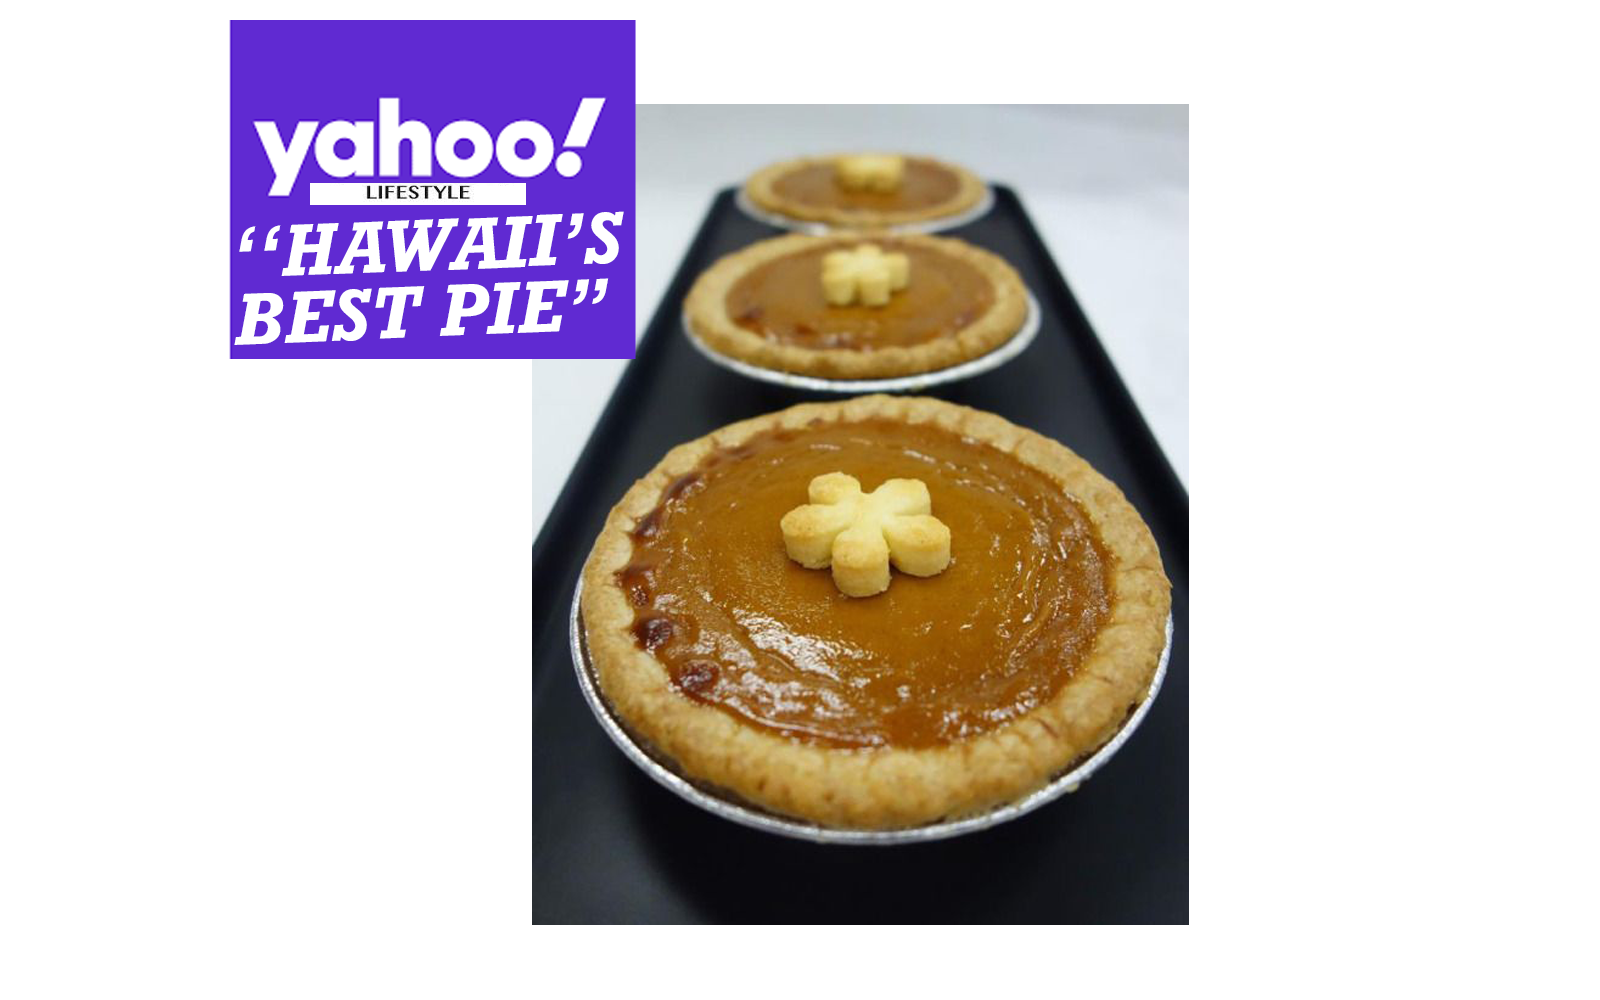 Family-owned pie shop snags title of ‘Hawaii’s best pie’